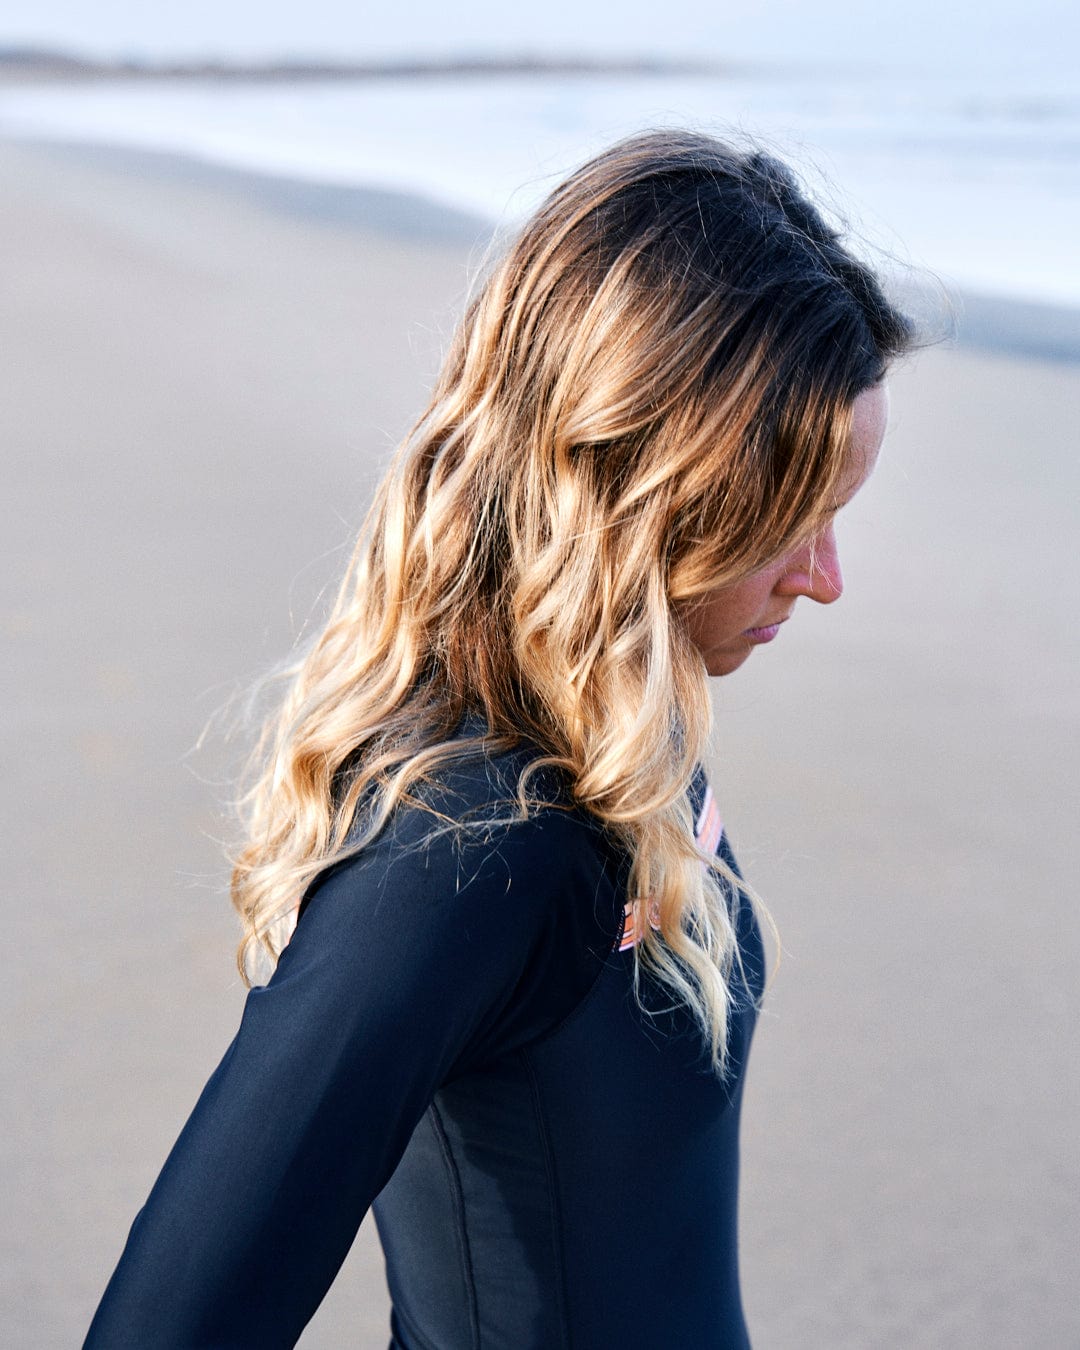 Profile view of a woman with blonde wavy hair, wearing a Saltrock Cora Retro - Recycled Womens Long Sleeve Swimsuit in Dark Grey, standing on a beach.